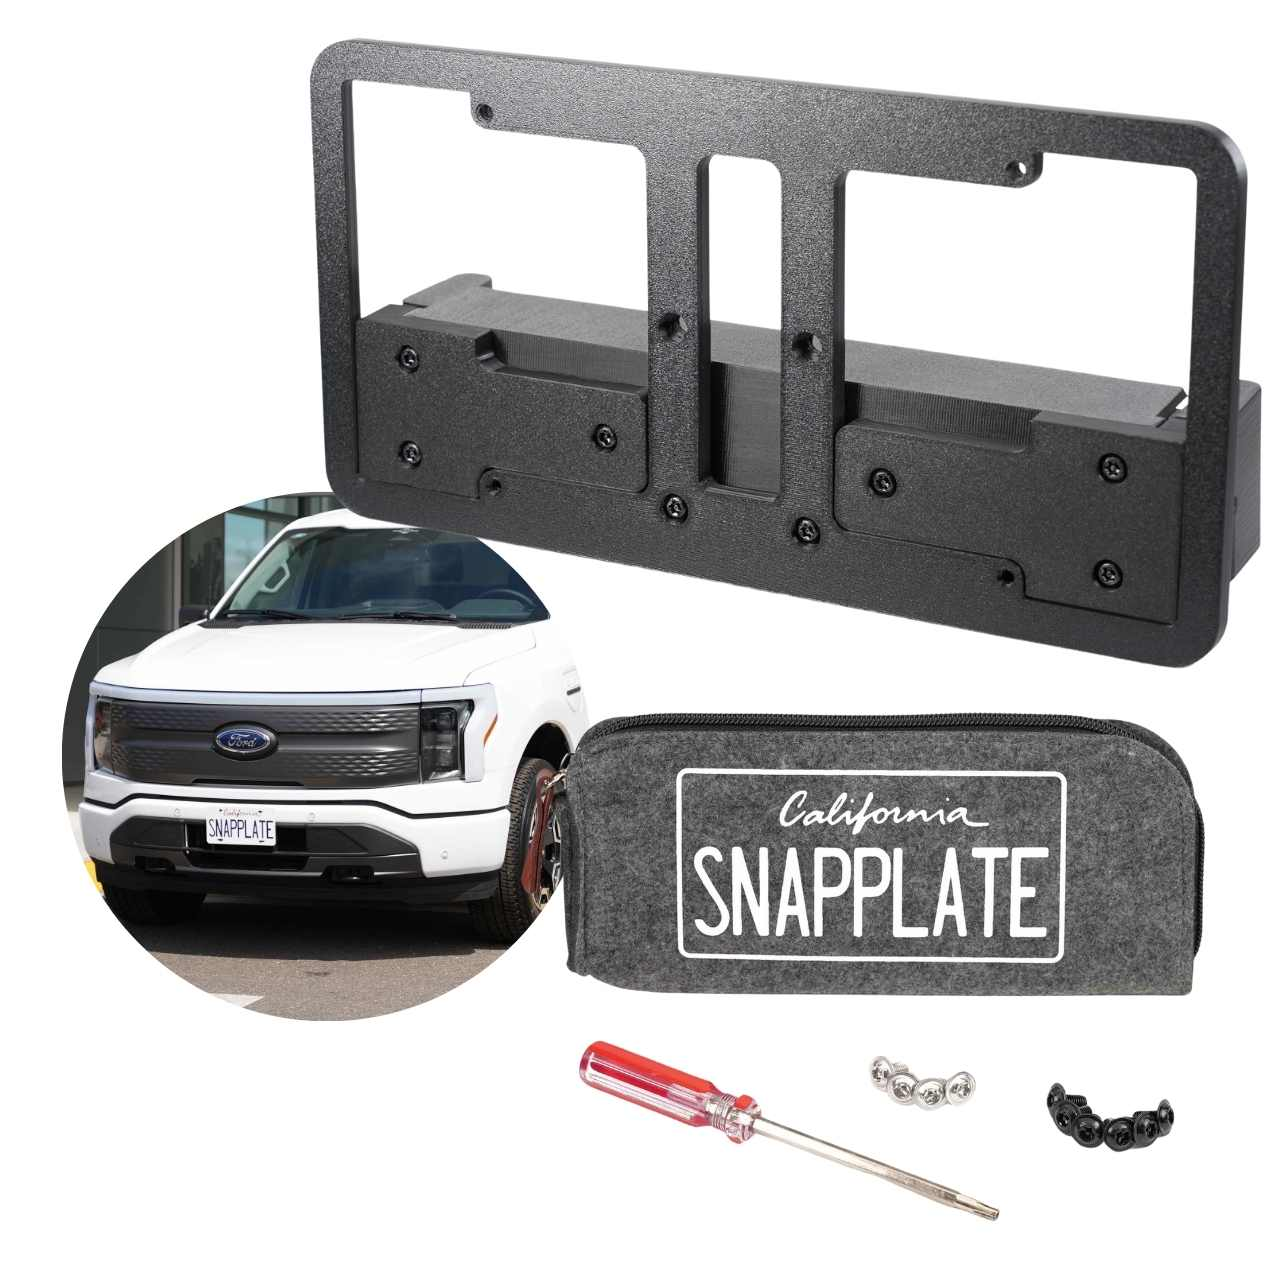 SnapPlate No-drill License Plate Bracket for Ford F-150 Lightning EV-1